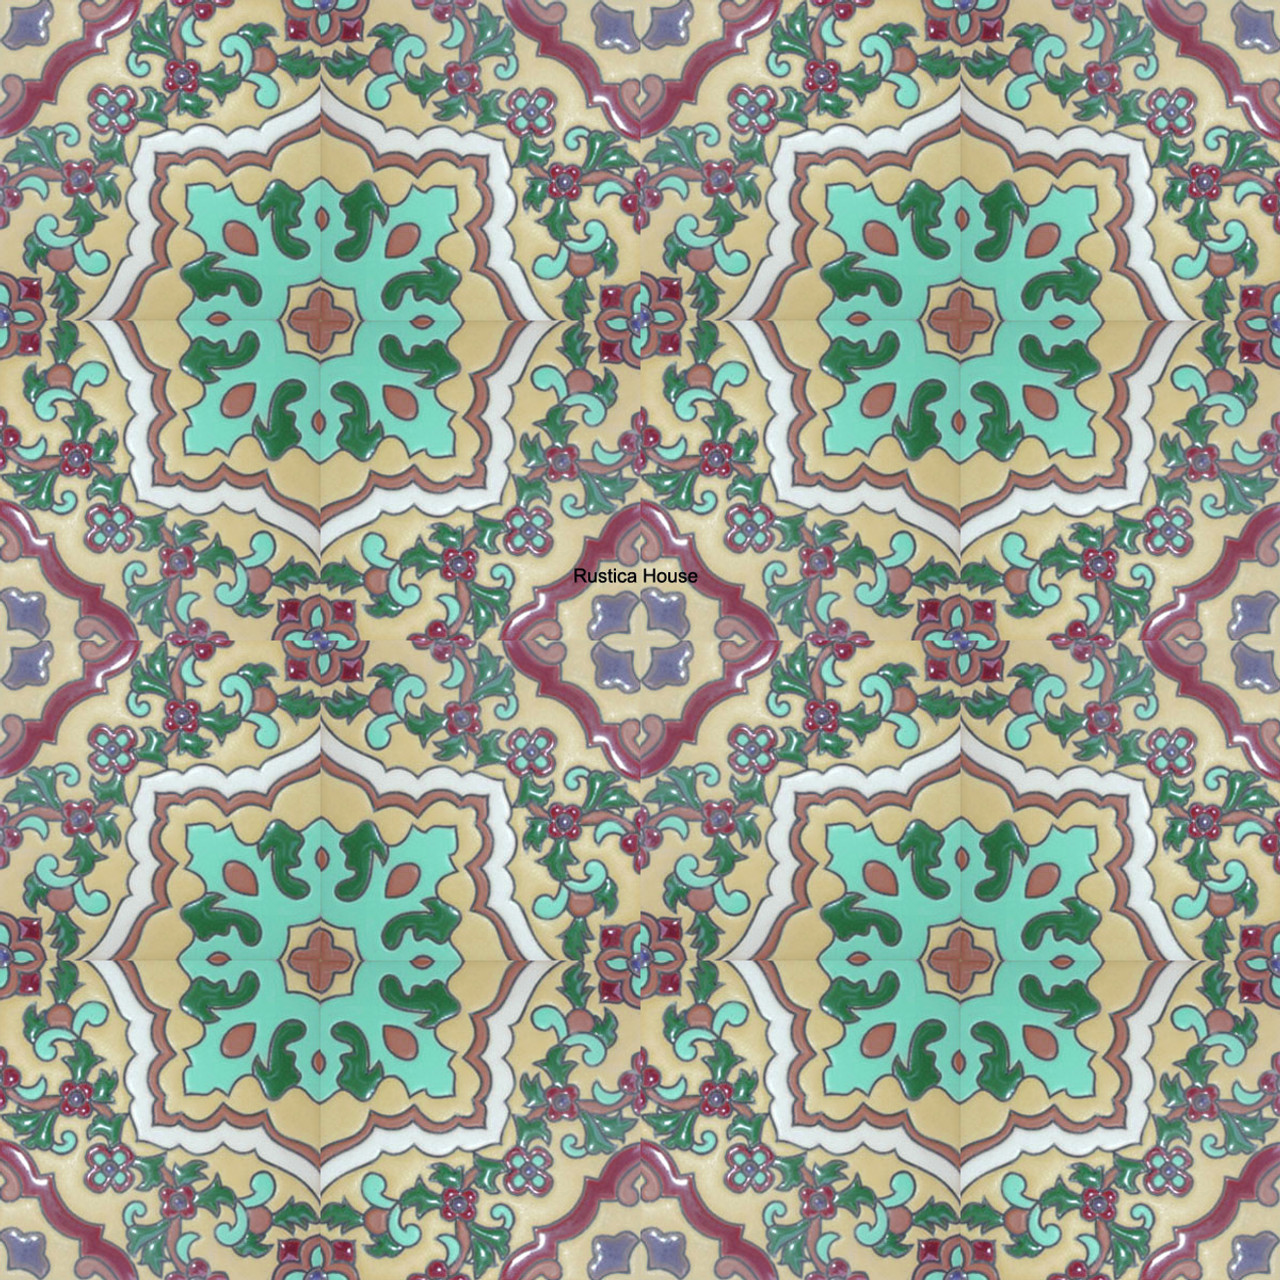 high relief tiles paintes plum, green, pastel green and yellow wheat